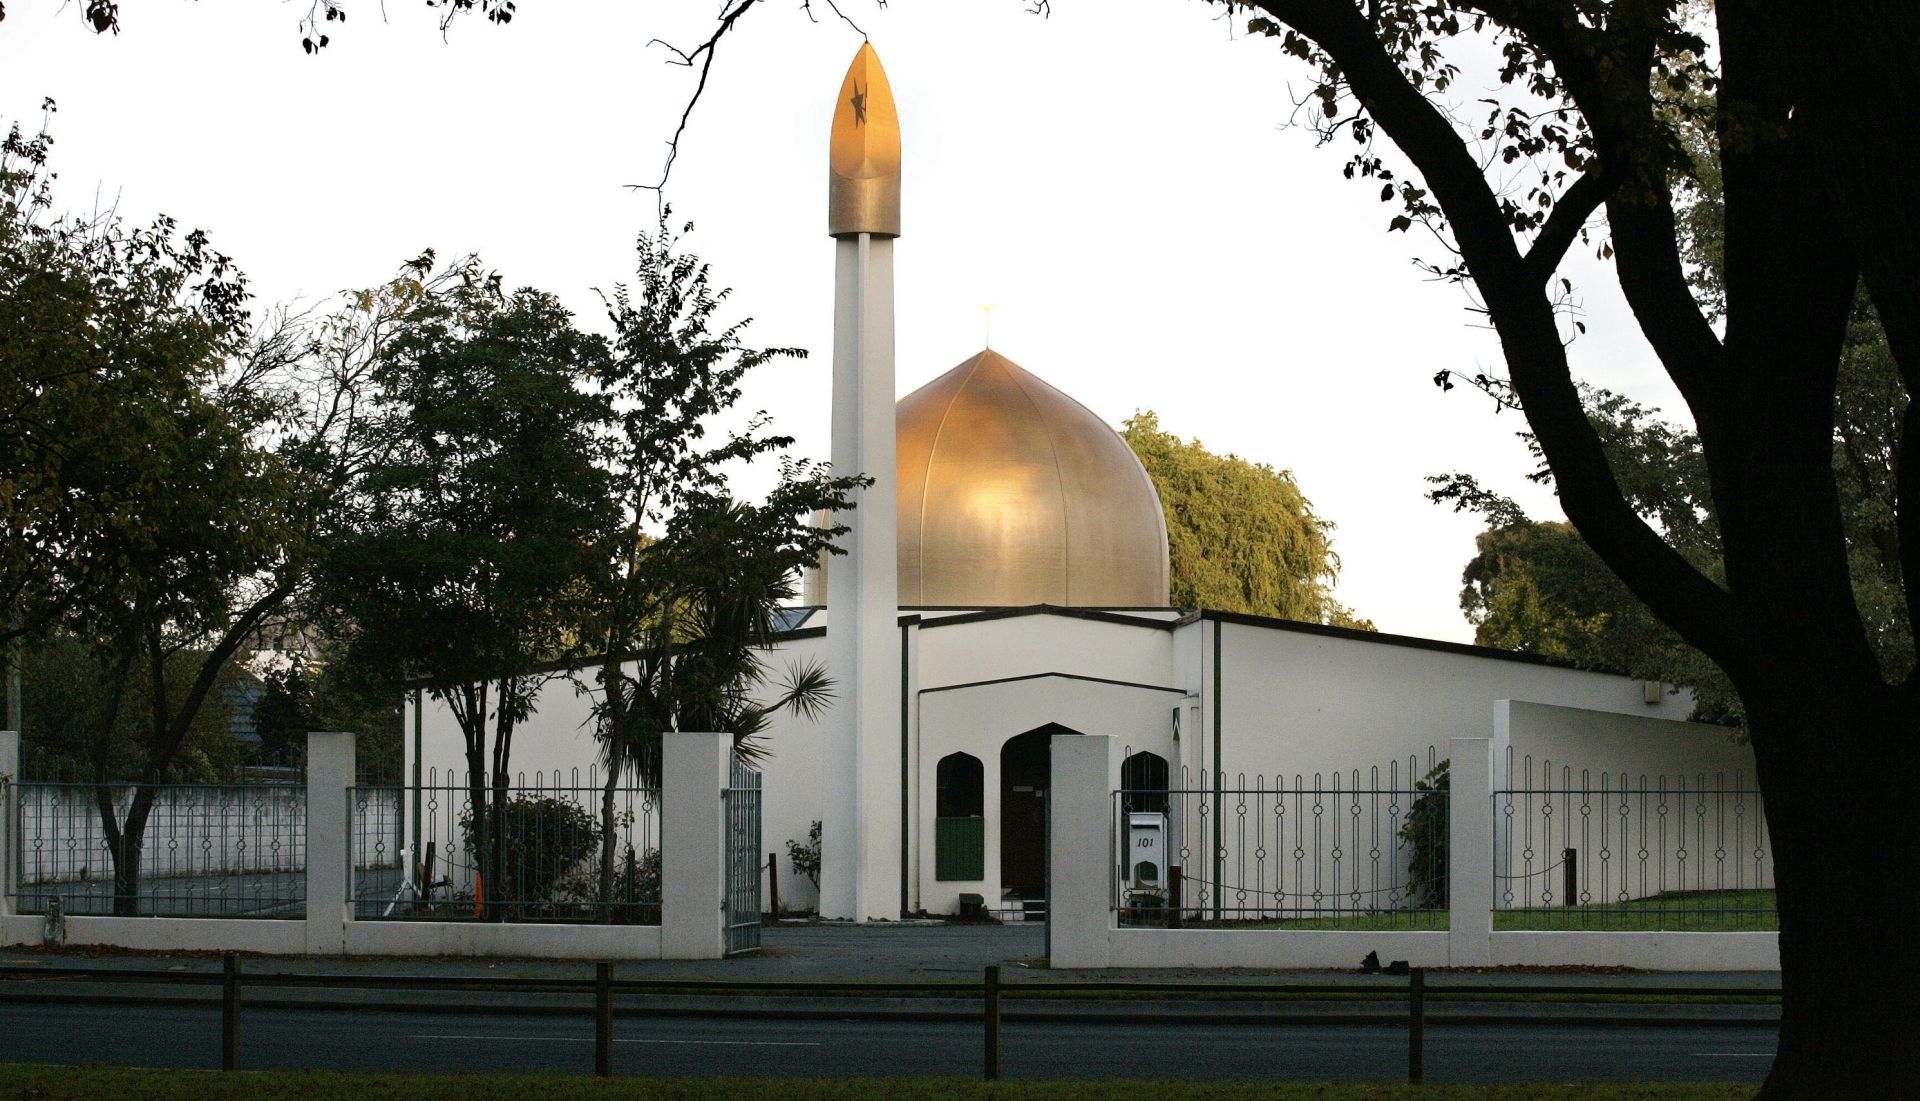 epa07522590 (FILE) - An undated file image shows Masjid Al Noor Mosque on Deans Avenue, the scene of a mass shooting, in Christchurch, New Zealand, 15 March 2019 (reissued 23 April 2019). Reports on 23 April 2019 state Sri Lanka's state minister of defence Ruwan Wijewardene telling Sri Lankan parliament 23 April that the initial investigation on Sri Lankan bombings on 21 April 2019 points to the suicide bomb attacks that killed 310 people been in retaliation for the mosque attack in New Zealand.  EPA/MARTIN HUNTER NEW ZEALAND OUT